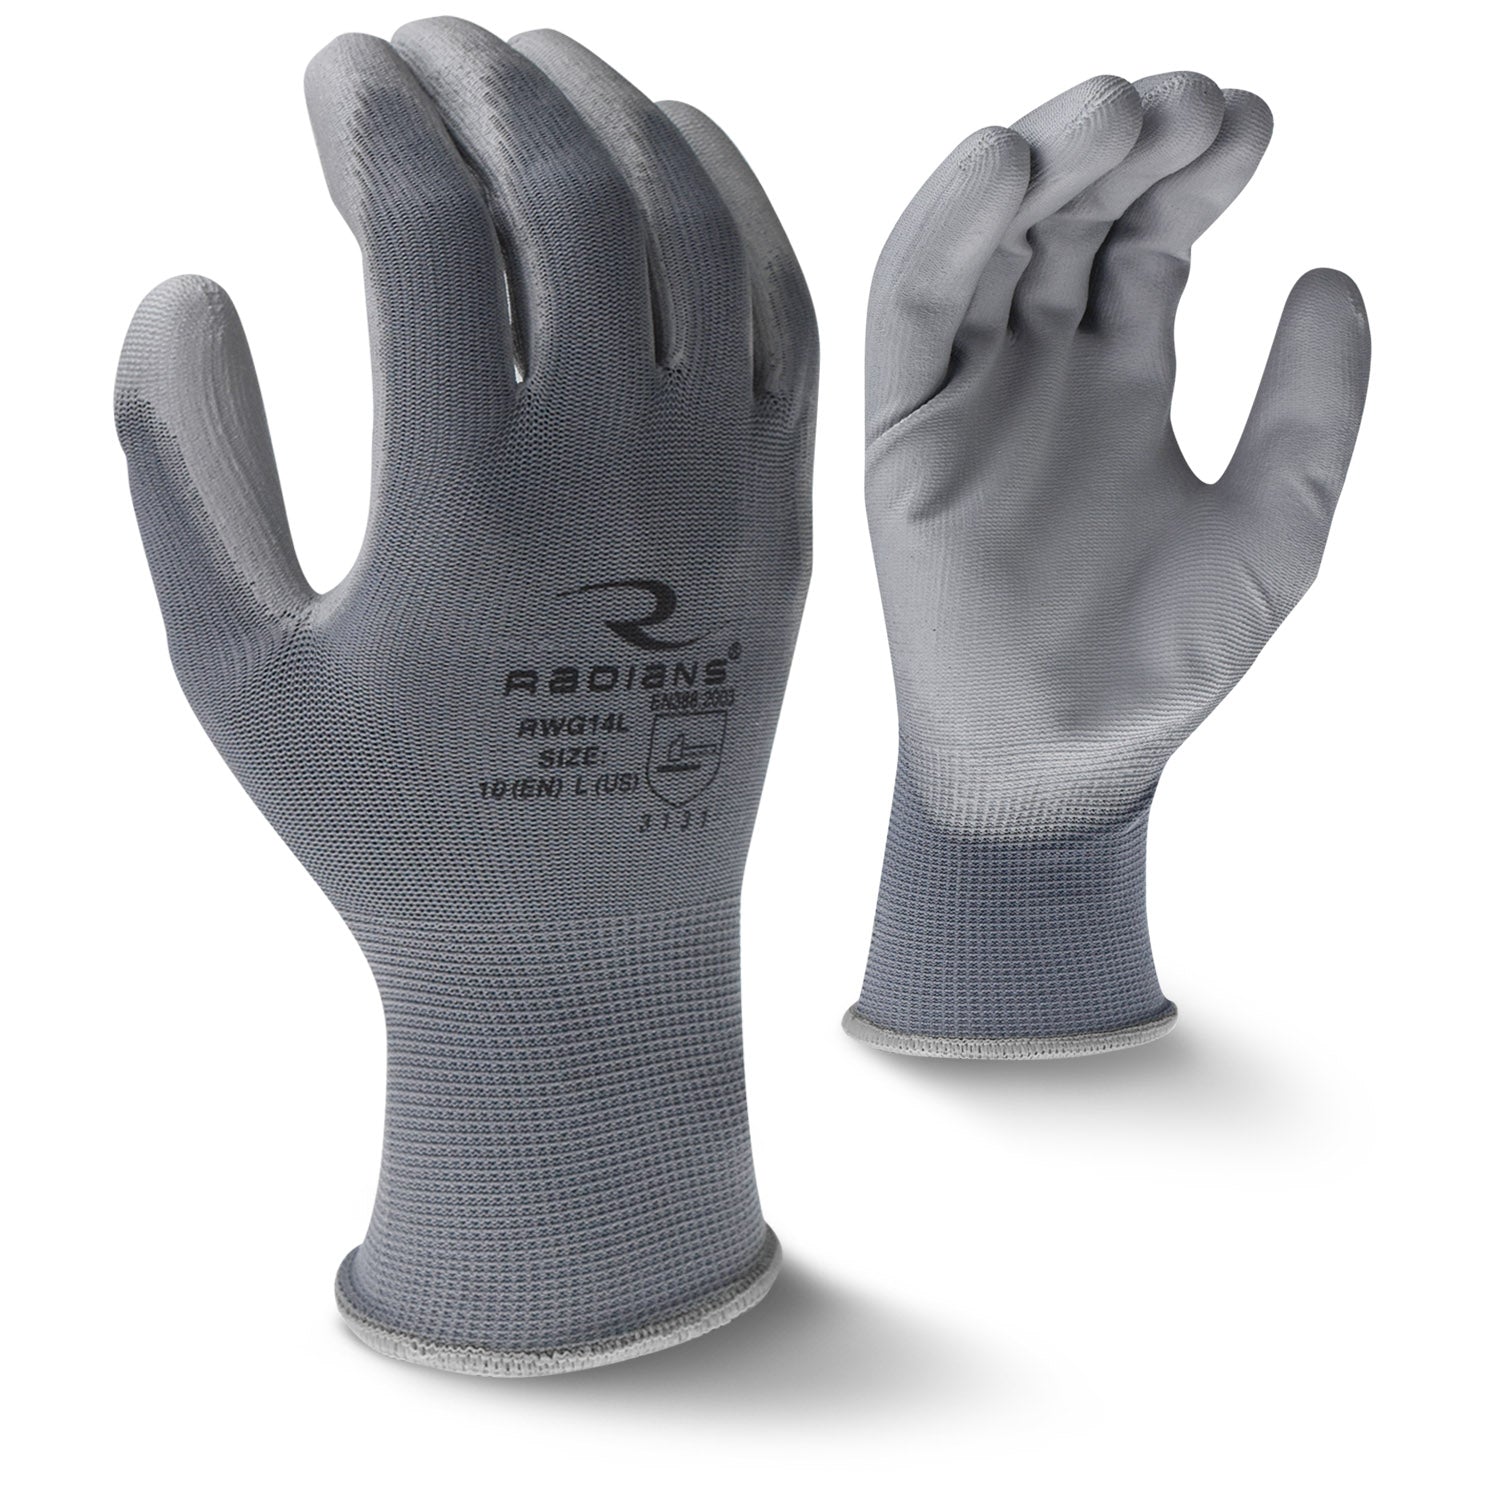 Radians RWG14 PU Palm Coated Glove-eSafety Supplies, Inc